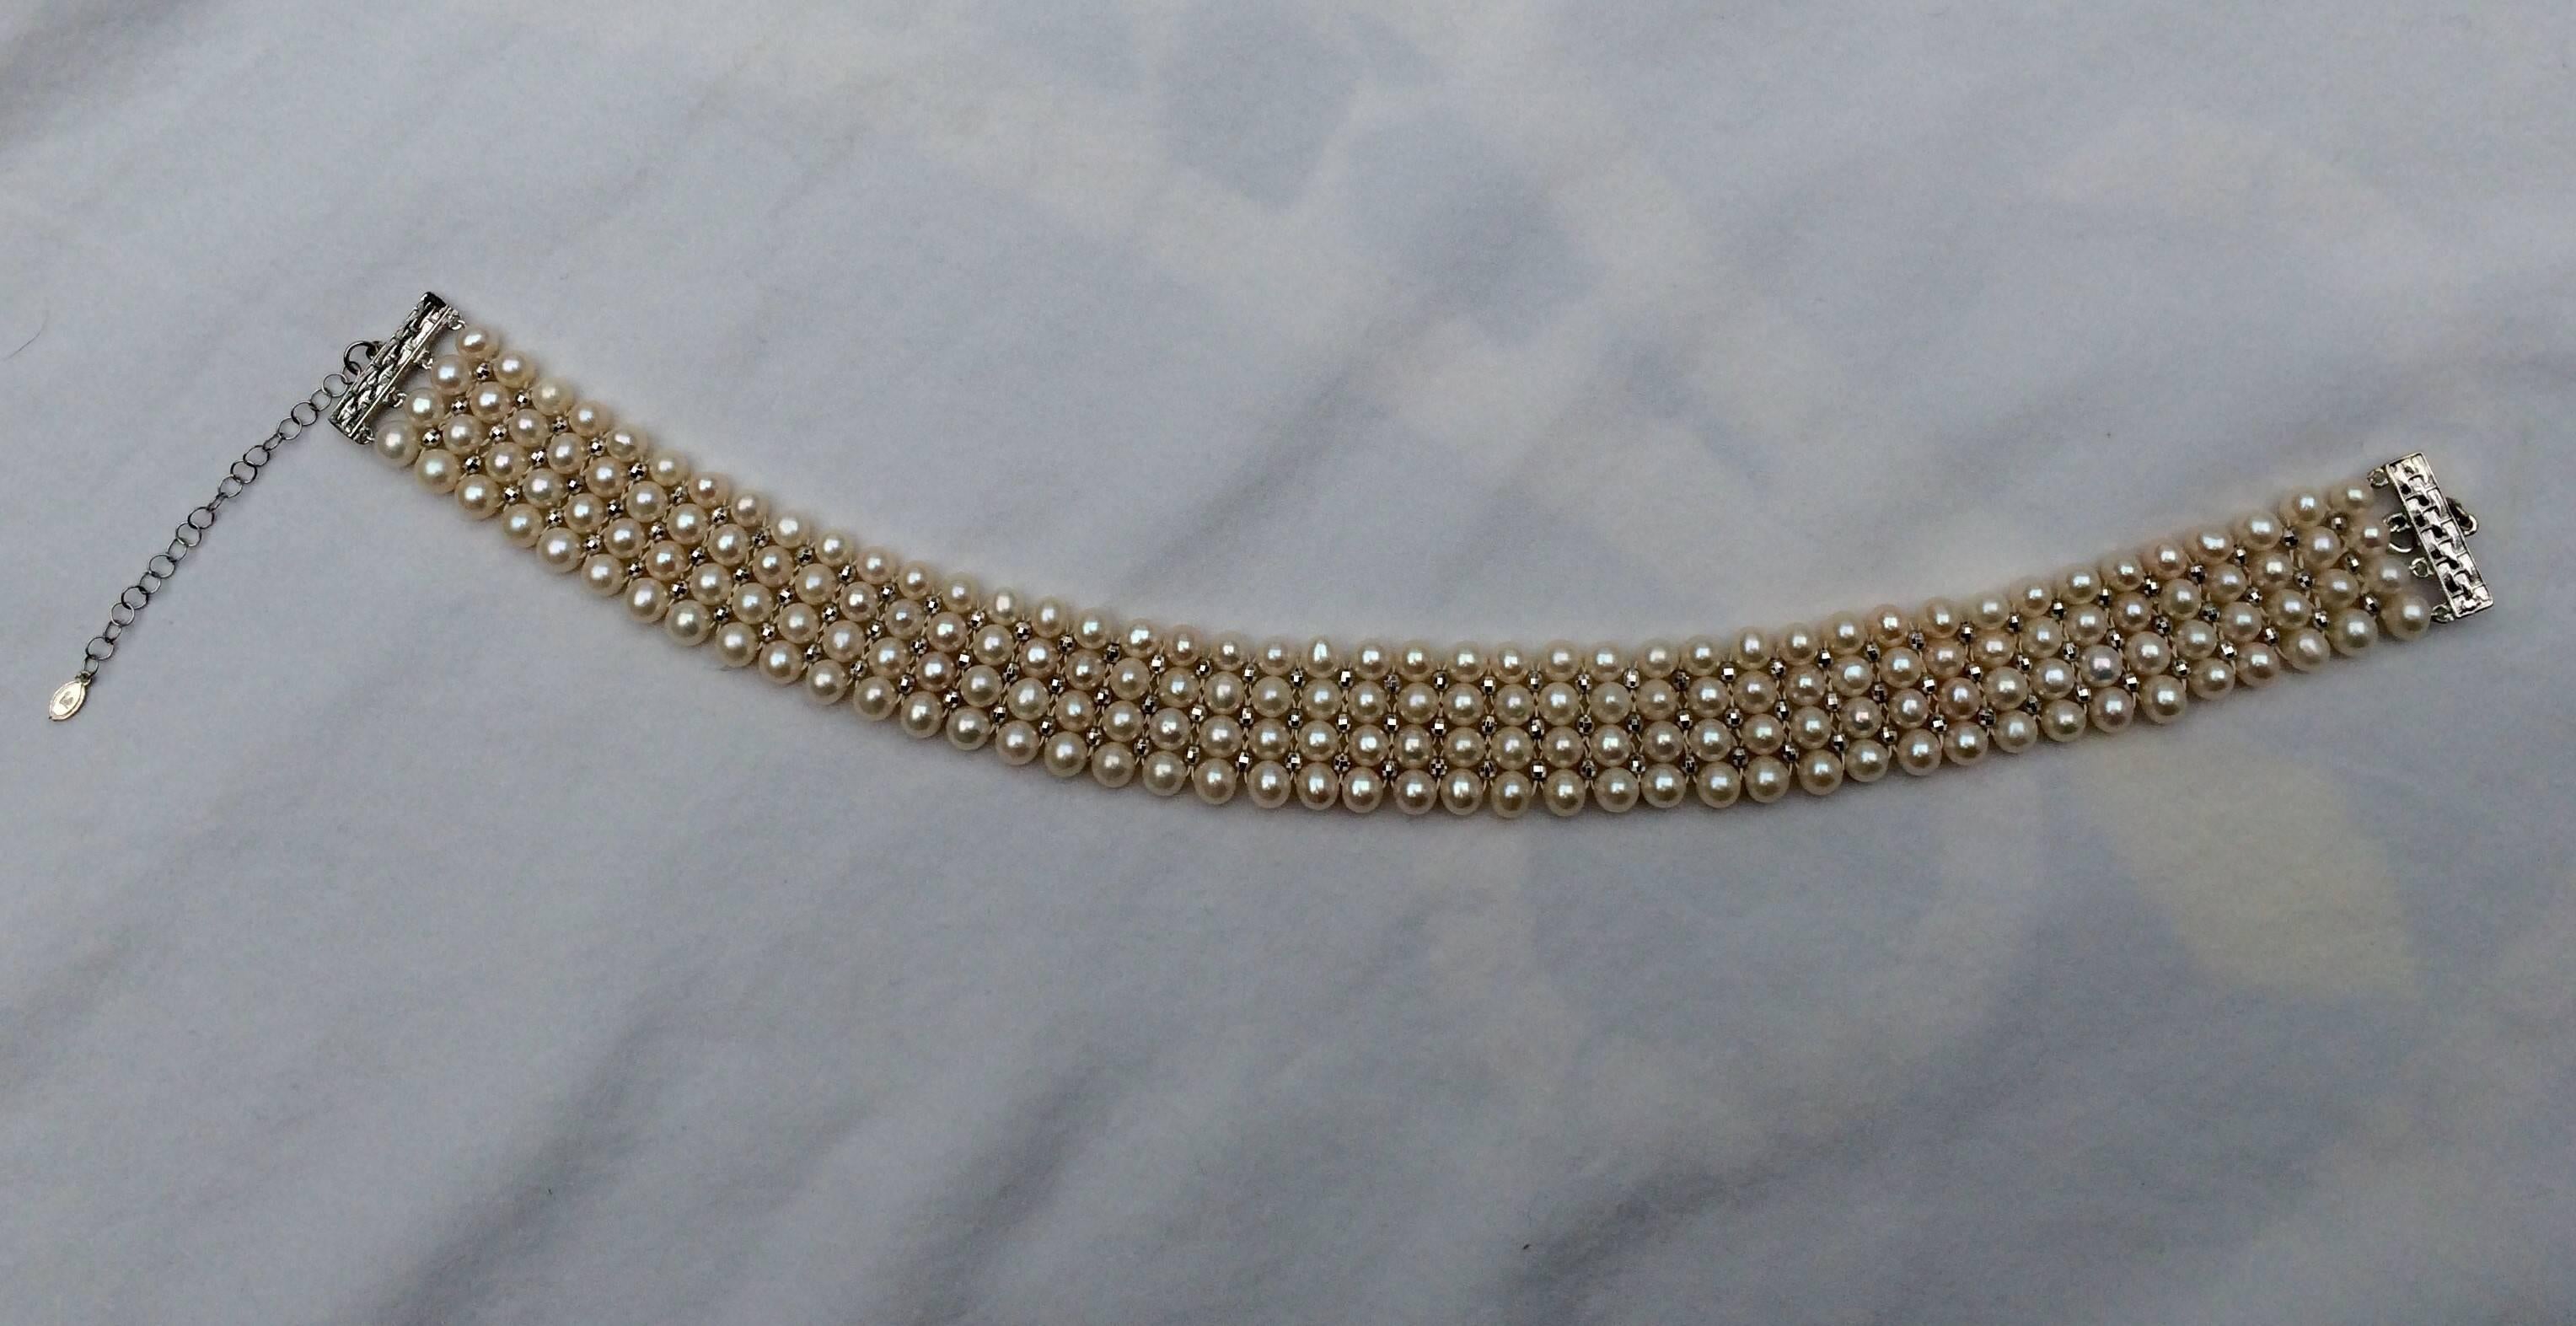 Marina J. Woven Pearl Gold Chain Adjustable Choker Necklace 2